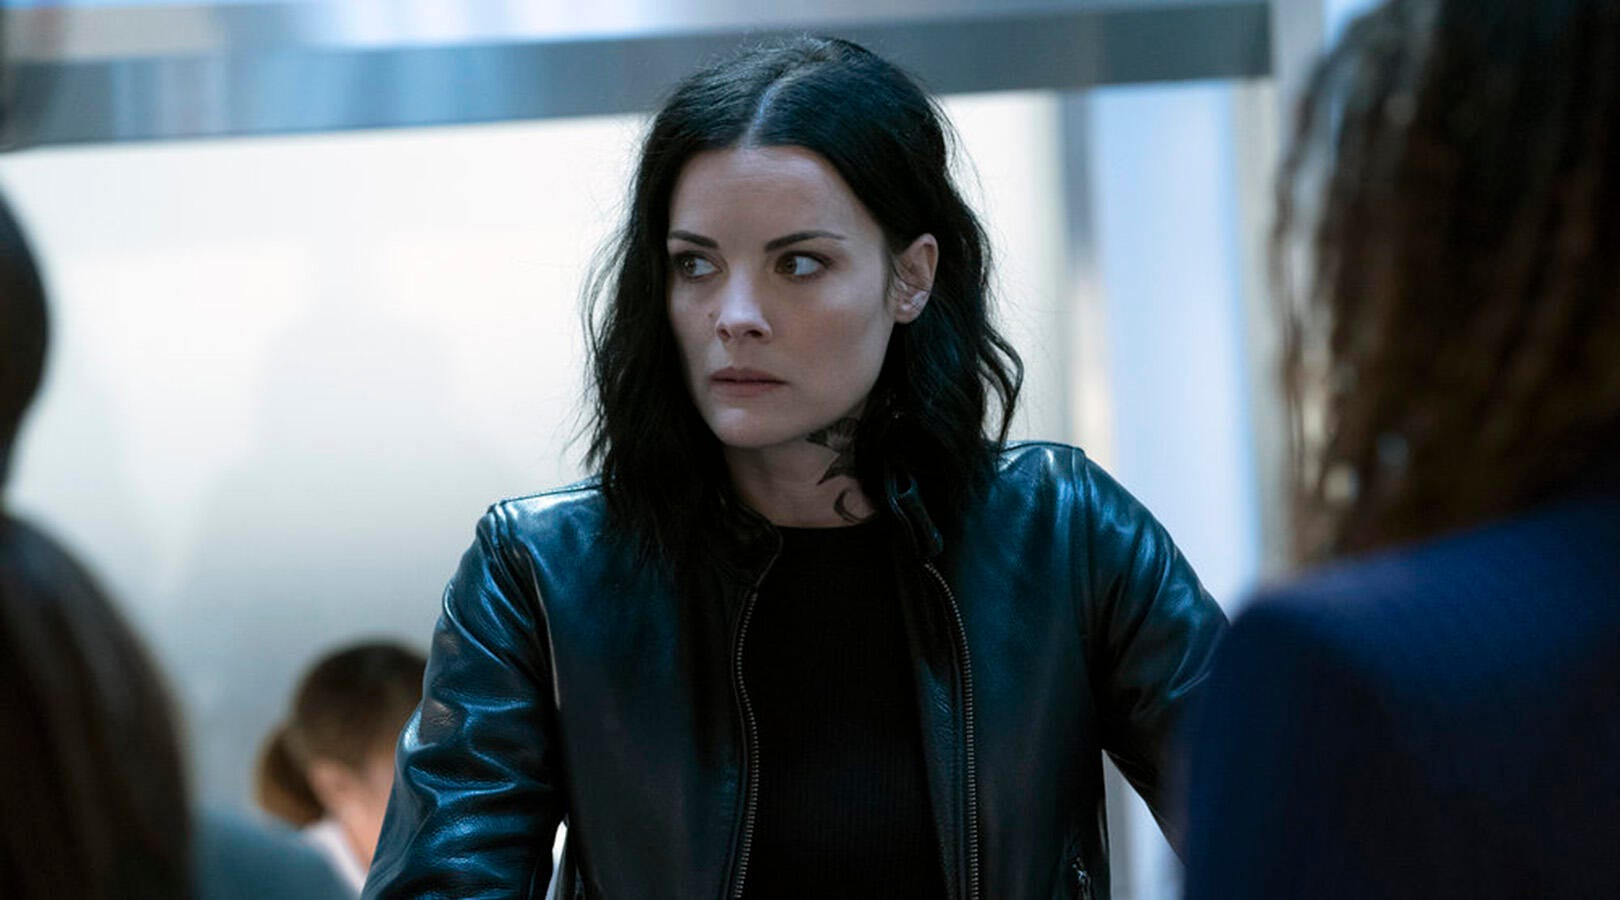 11 Shows Like Blindspot to Watch If You Miss Blindspot - TV Guide